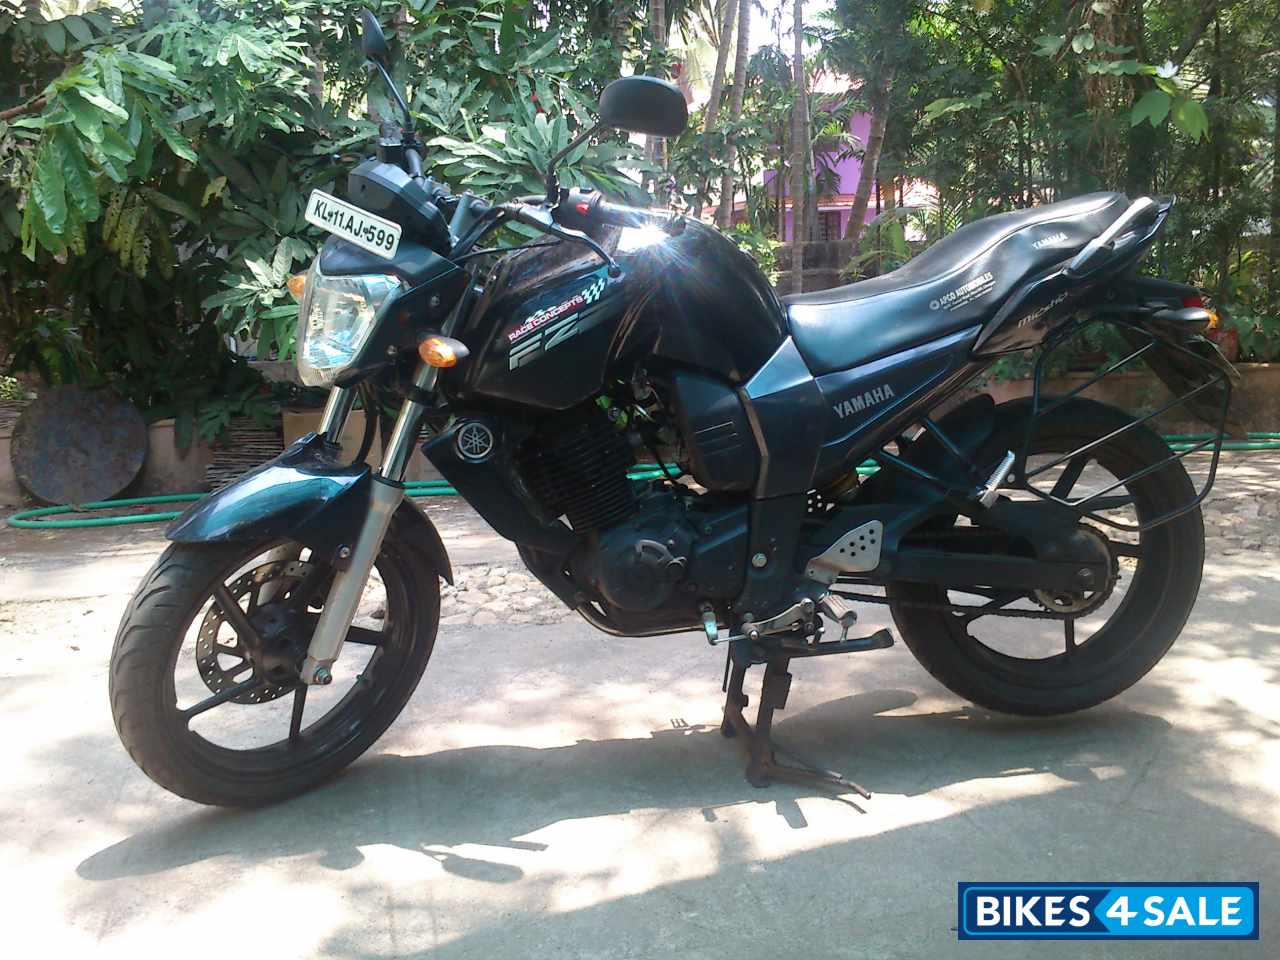 Used 2011 model Yamaha FZ16 for sale in Kozhikode. ID 77458. Midnight ...